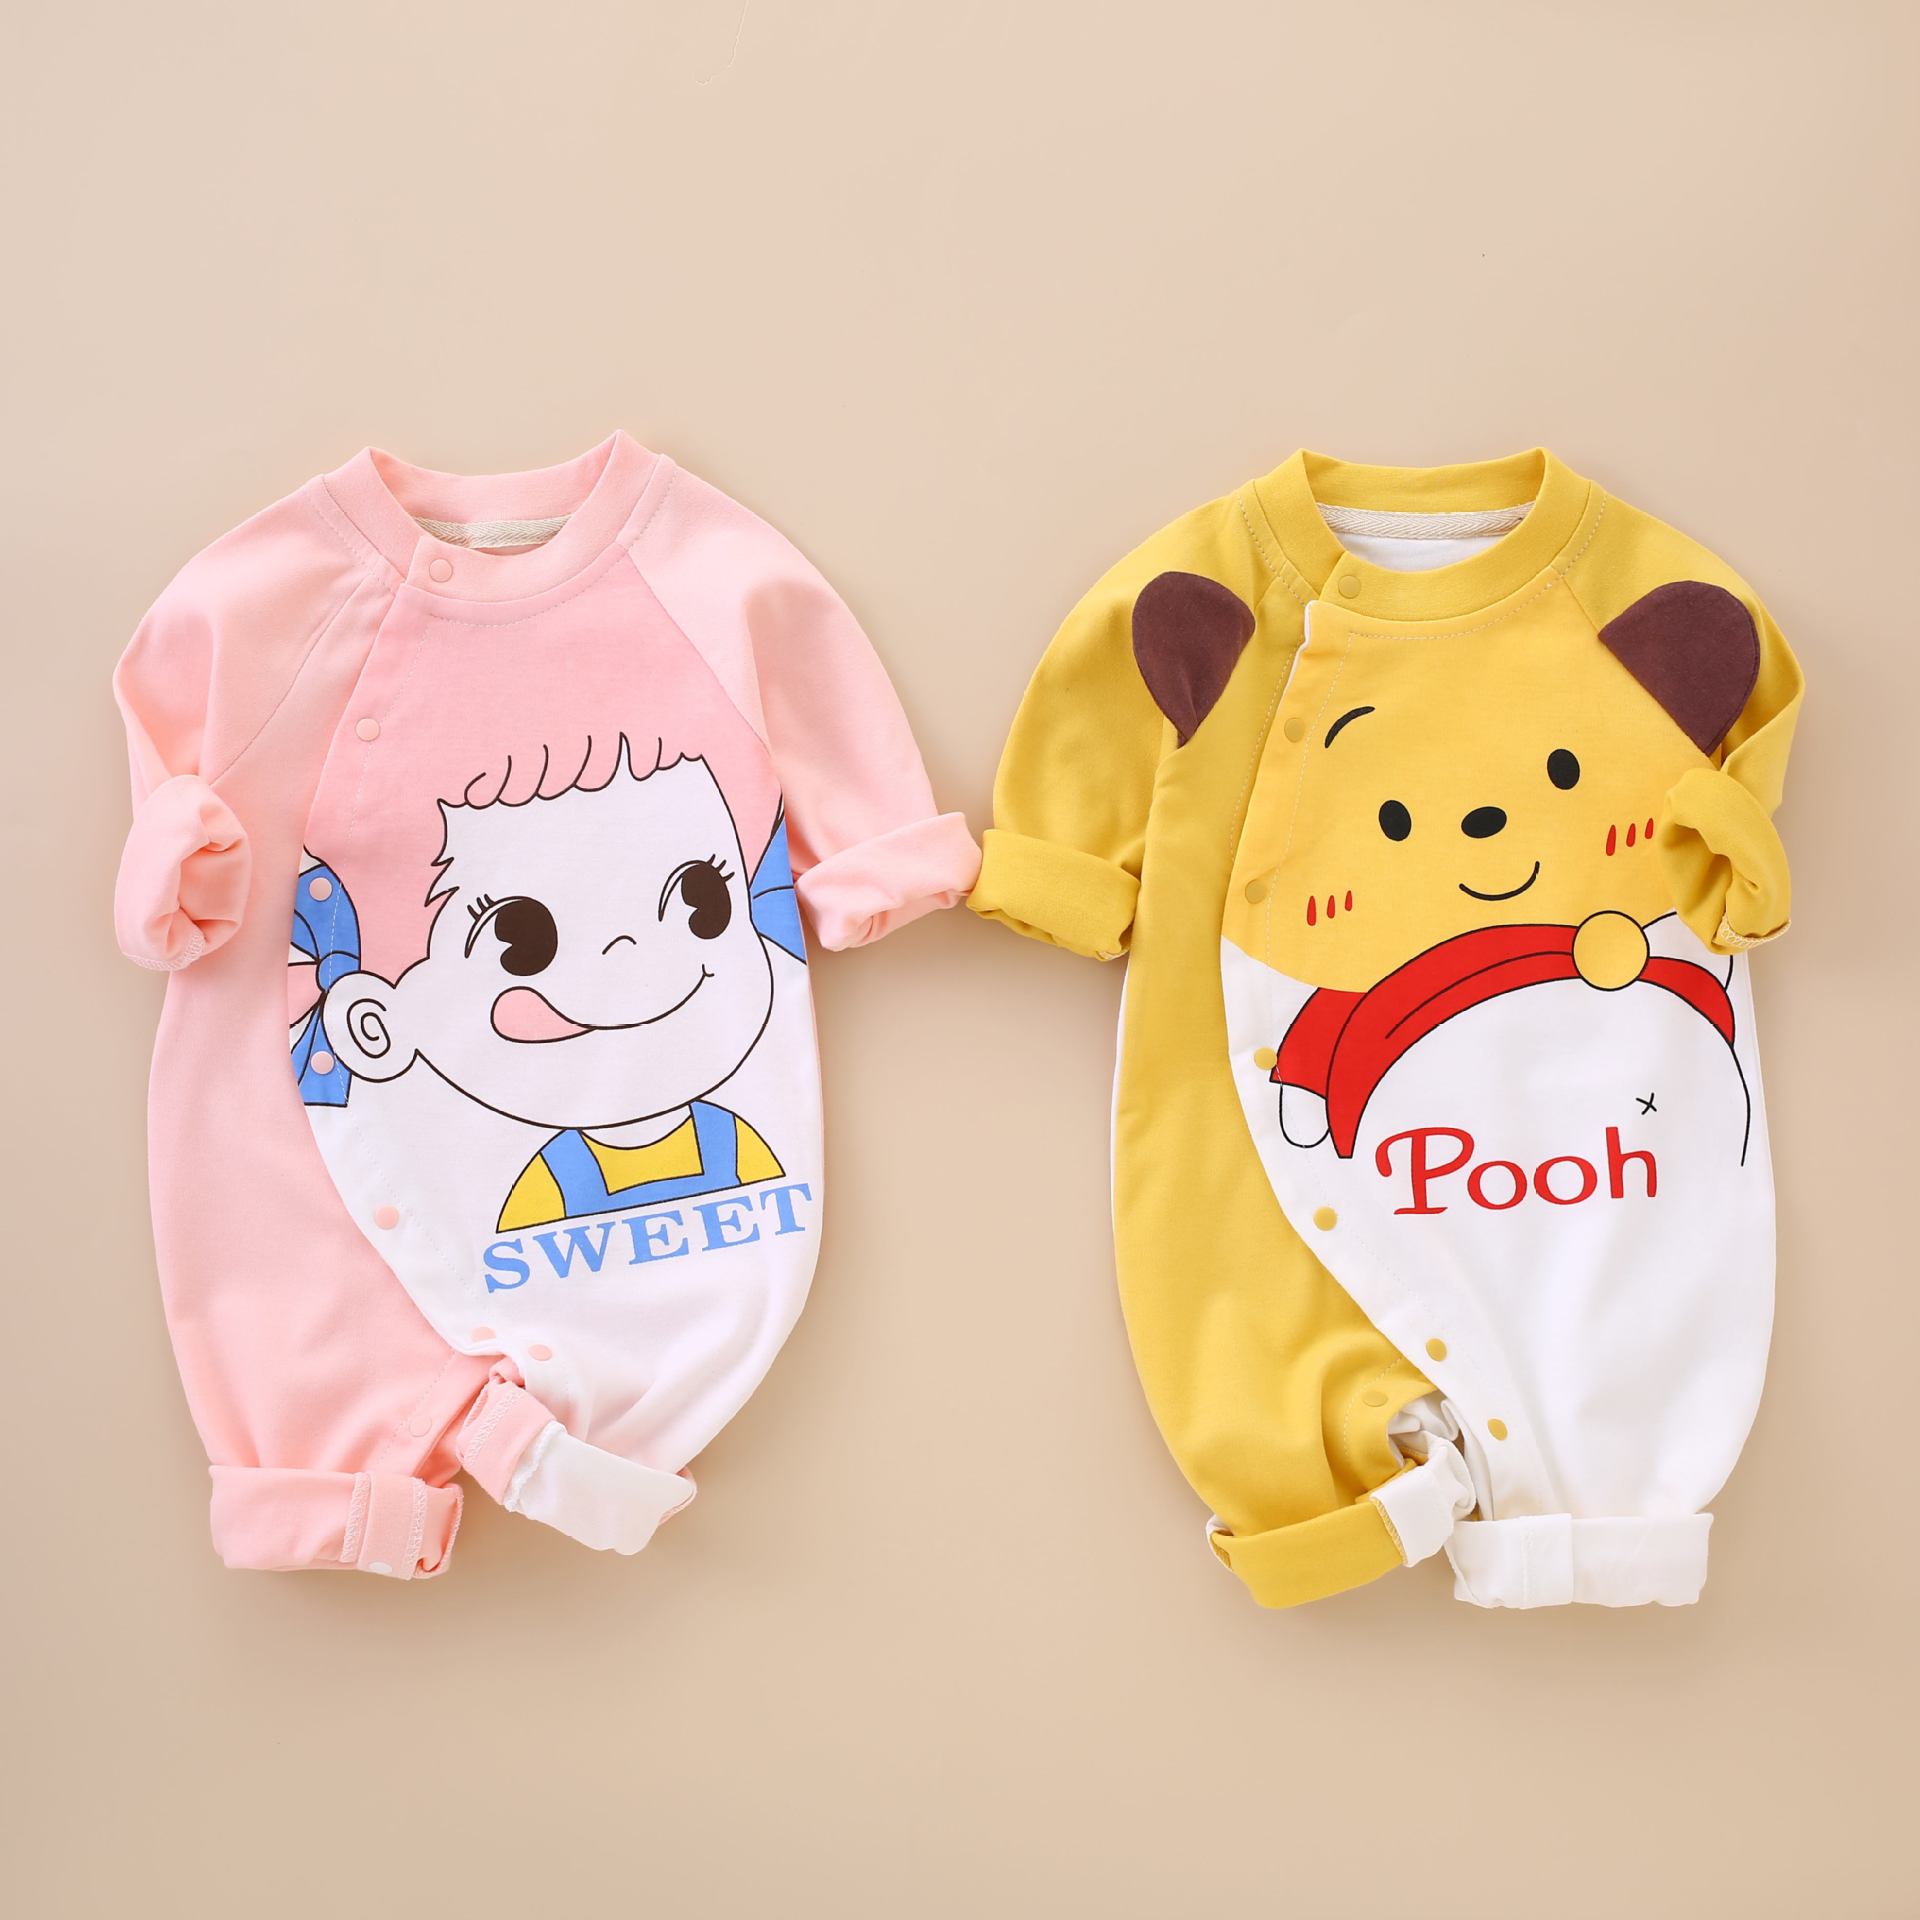 Baby Clothes Pure Cotton Spring and Autumn Men's and Women's Baby Jumpsuit Newborn Cute Super Cute Long Sleeve Outing Romper Thin